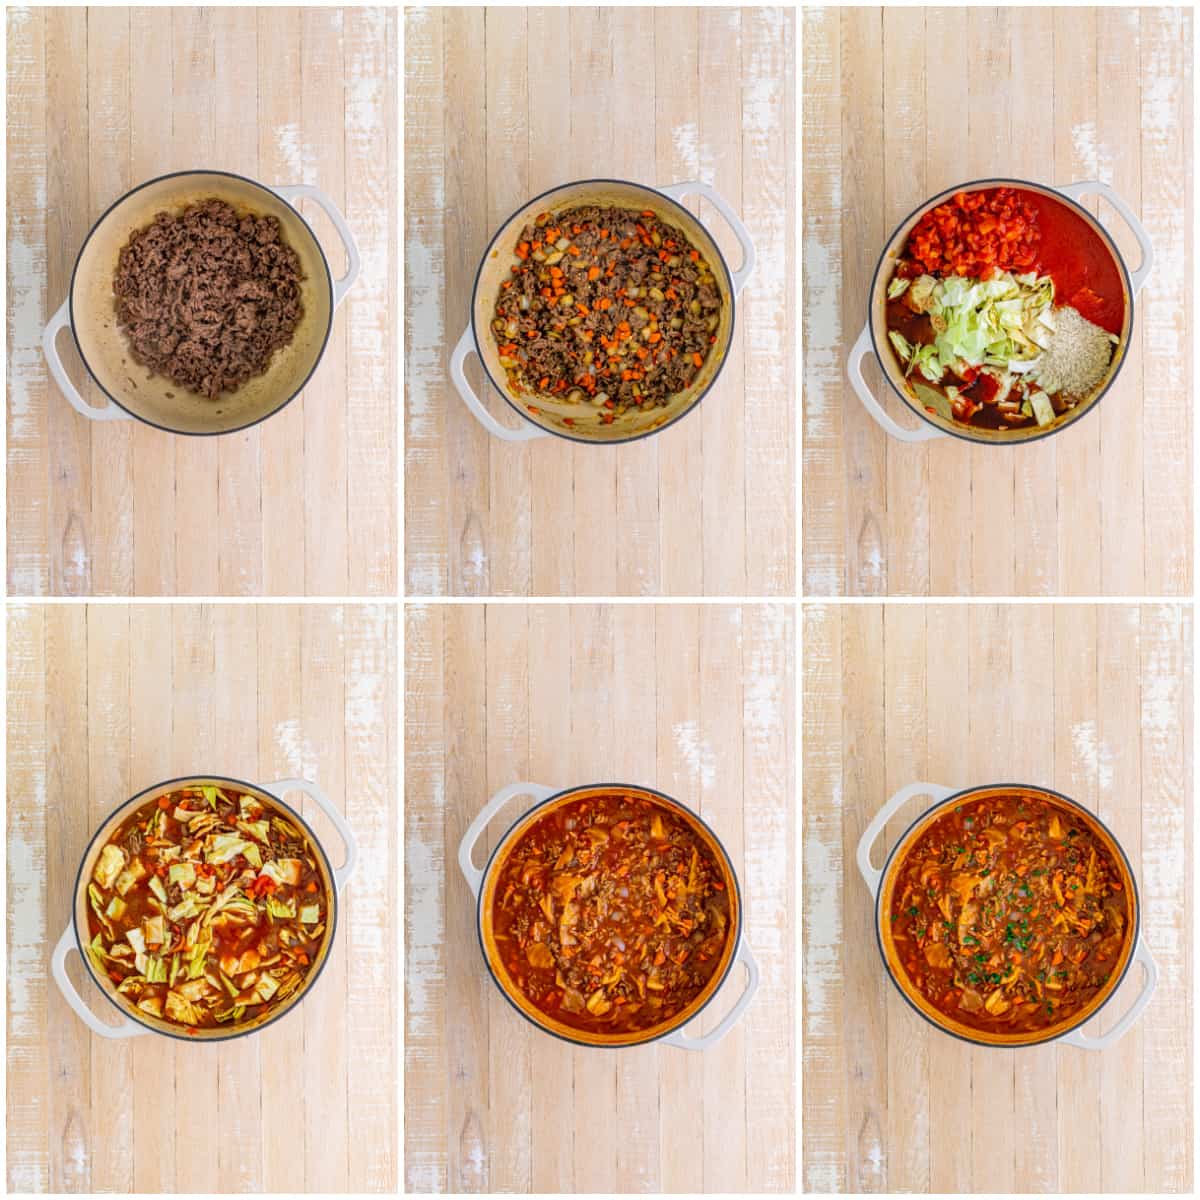 Step by step photos on how to make Cabbage Roll Soup.